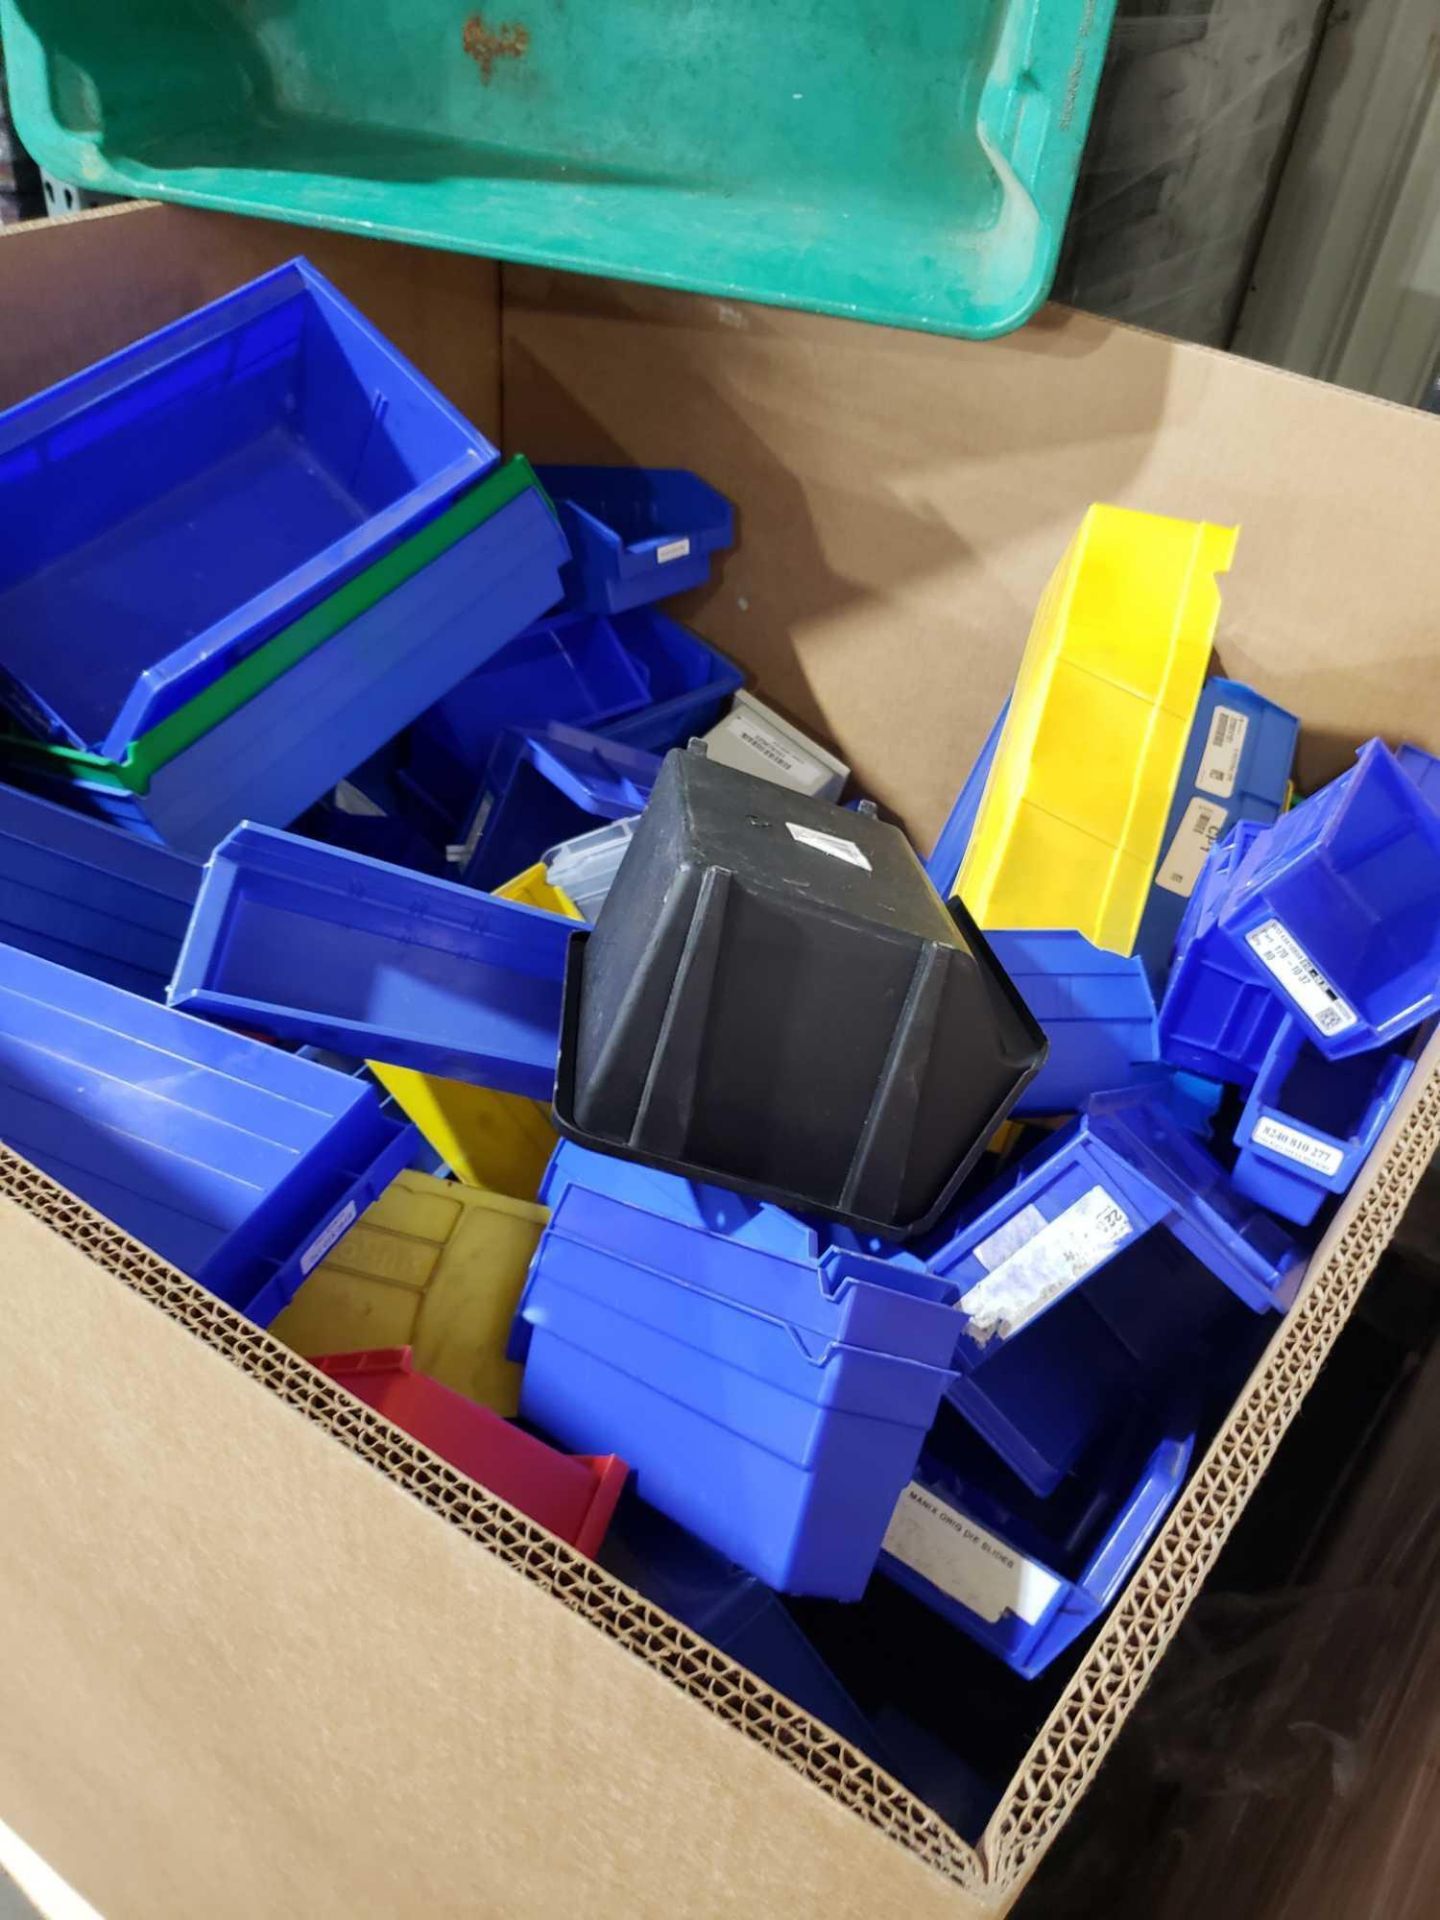 Contents of cardboard gaylord including large quantity of various size and color hanging bins. - Image 3 of 4